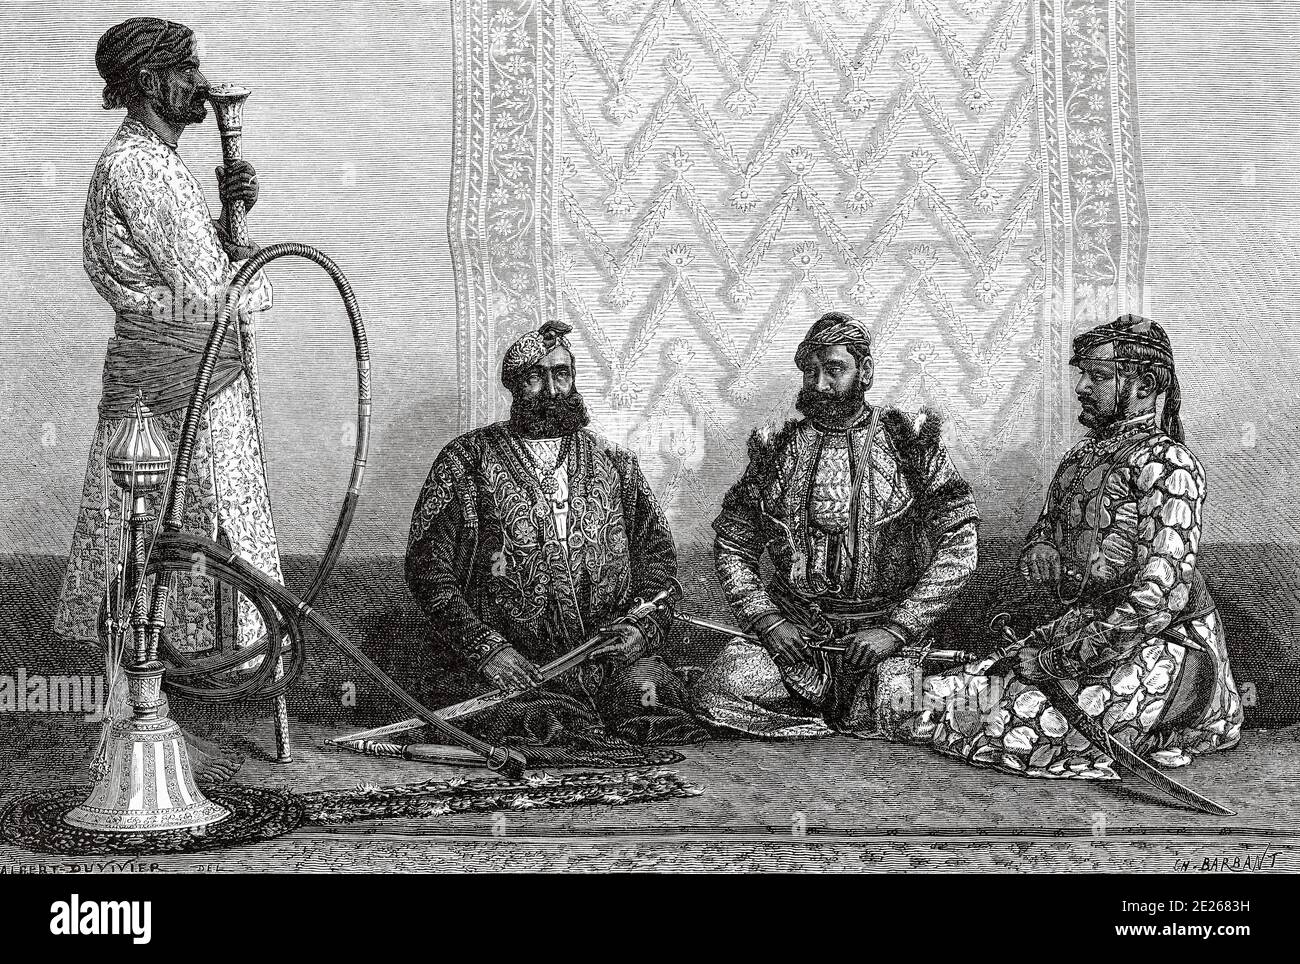 Portrait of Rajahs and Zamindar, or Zemindar from the northern provinces of Hindustan, India. Old engraving illustration from El Mundo en la Mano 1878 Stock Photo